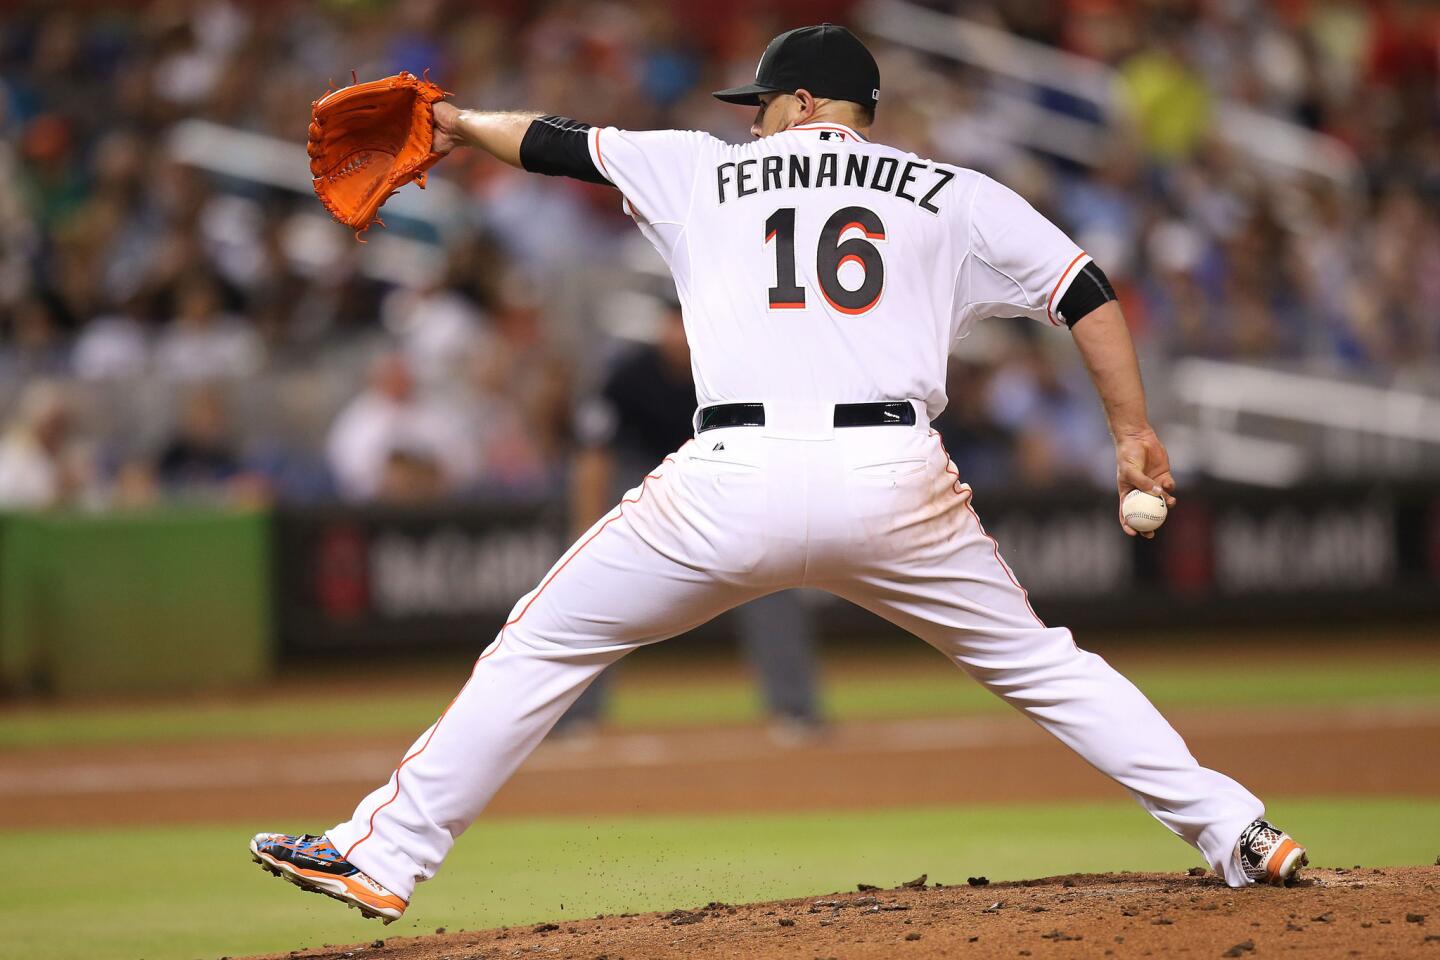 Jose Fernandez shuts down Reds, improves to 14-0 at Marlins Park